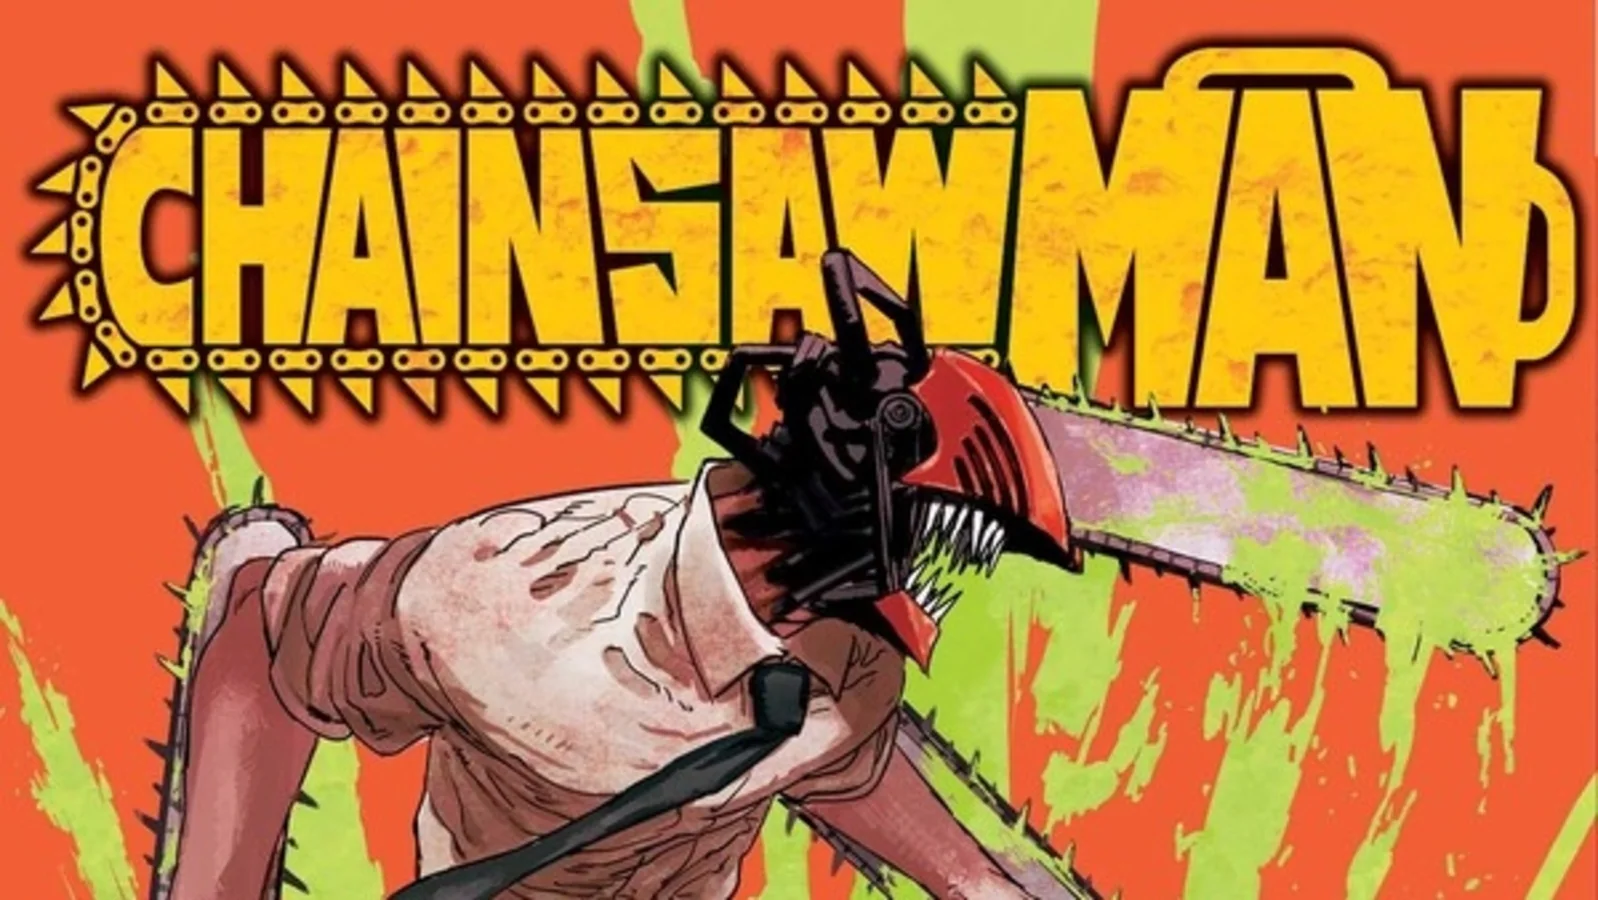 Inside the Epic Apocalypse How Chainsaw Man and Death Devil’s Battle is Changing the Manga World